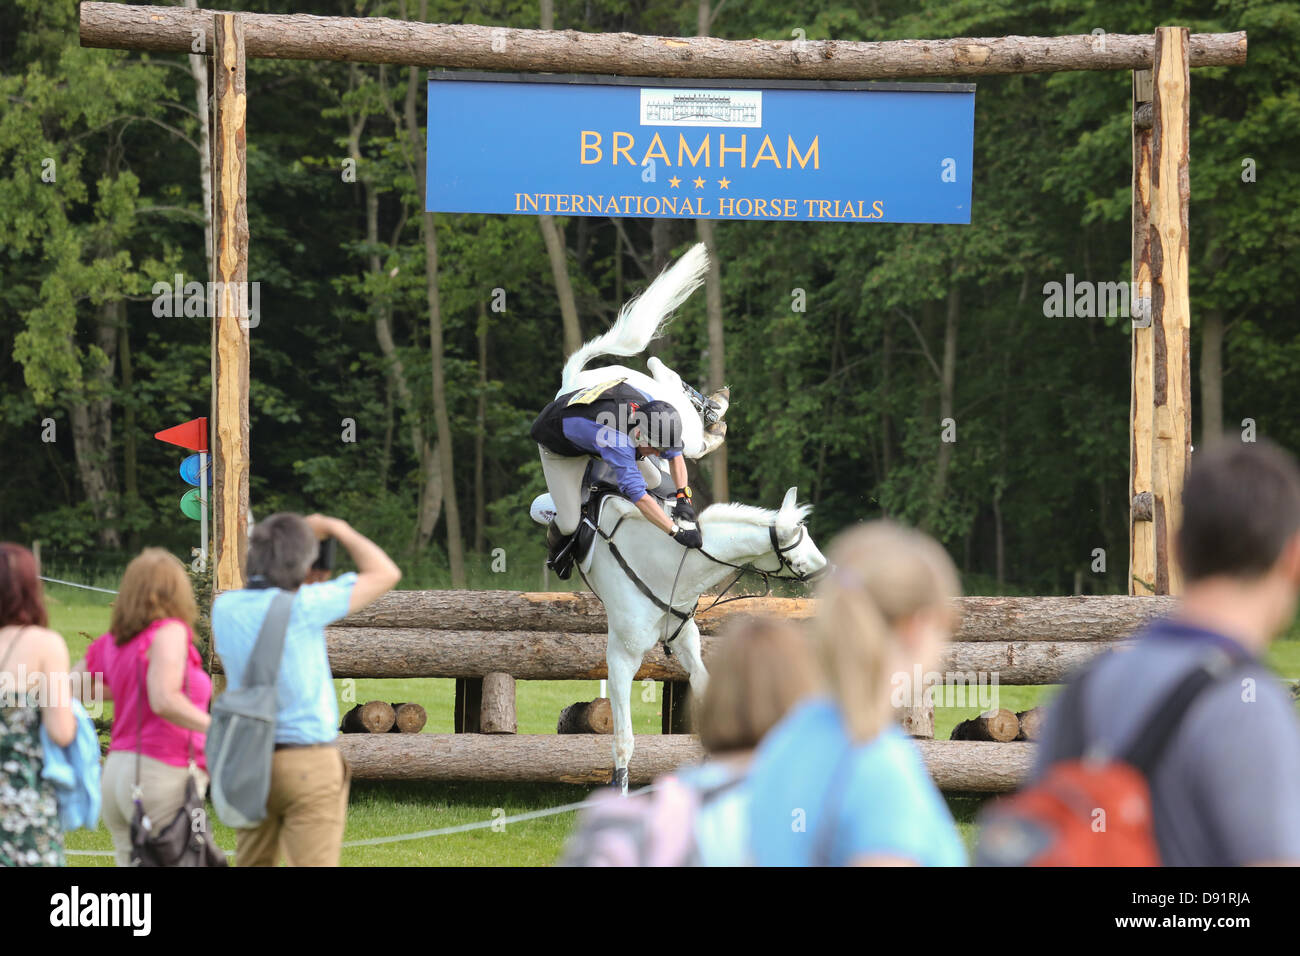 Leeds Bramham UK. 8th June 2013. Spectators look on in horror as a riderI is involved in a dramatic fall during the cross country event at the 40th Bramham horse trials, both horse and rider were not seriously injured. Credit: S D Schofield/Alamy Live News Stock Photo